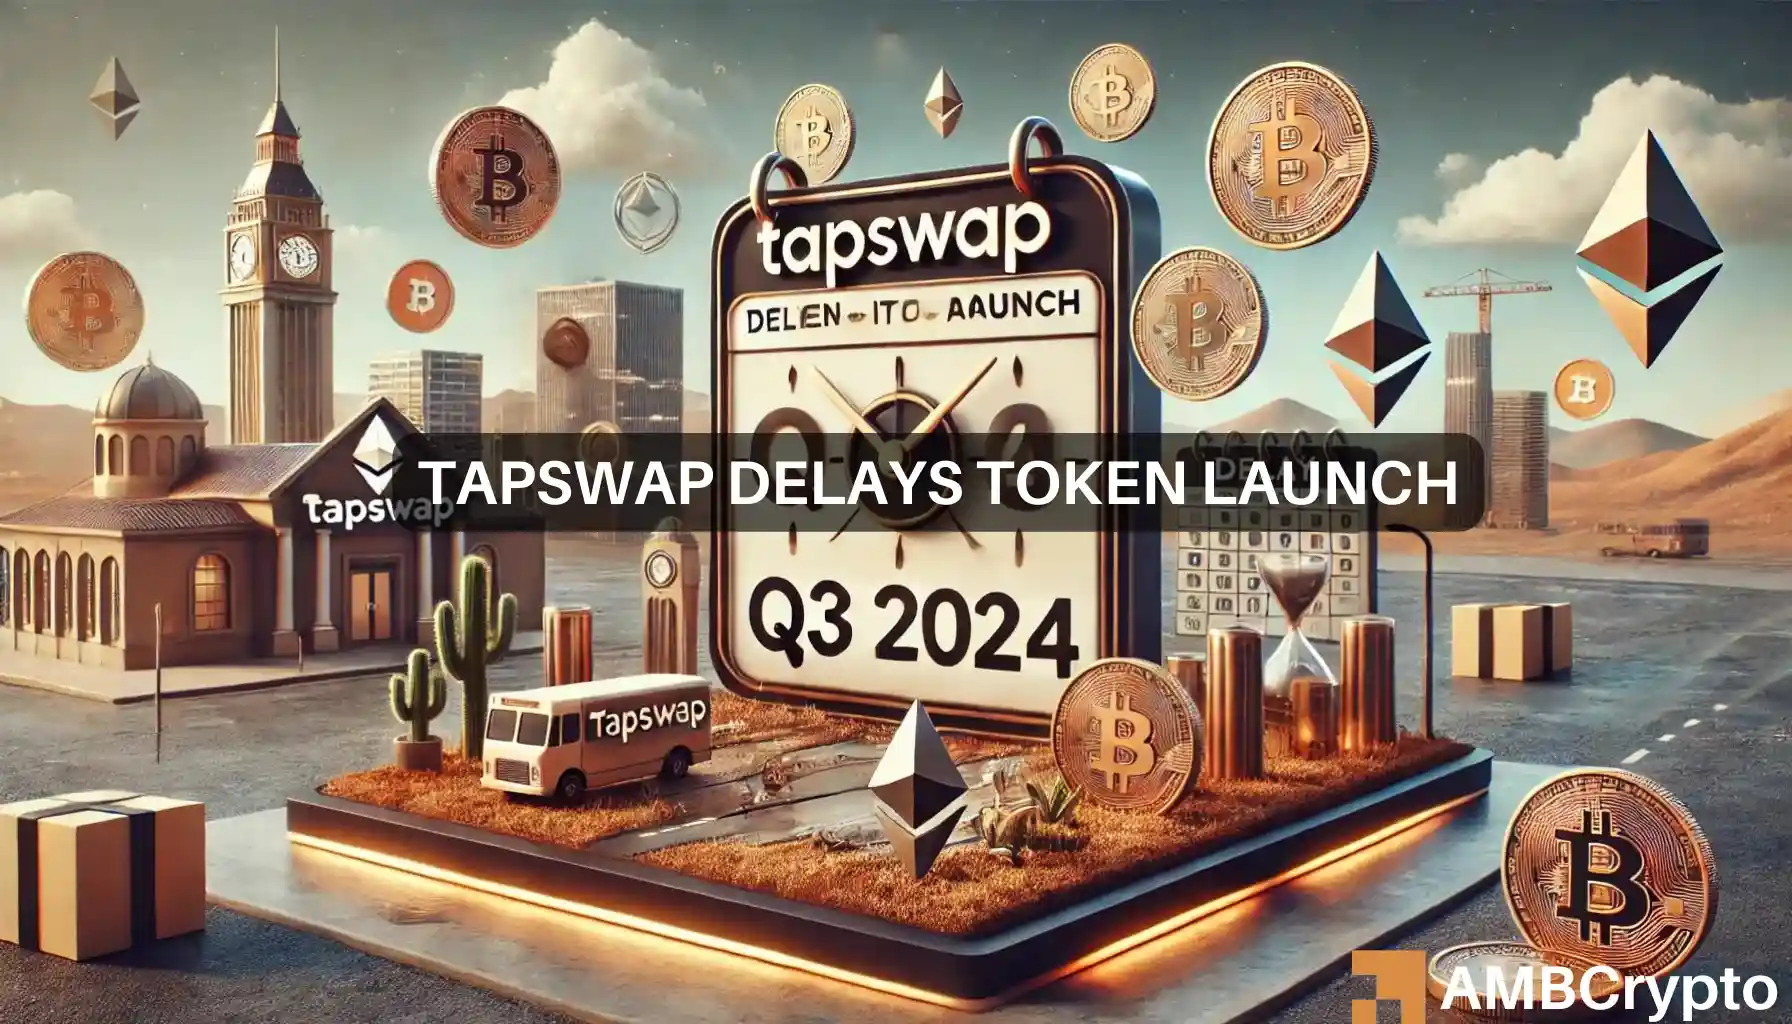 TapSwap token launch, airdrop delayed to Q3 2024: What's going on?